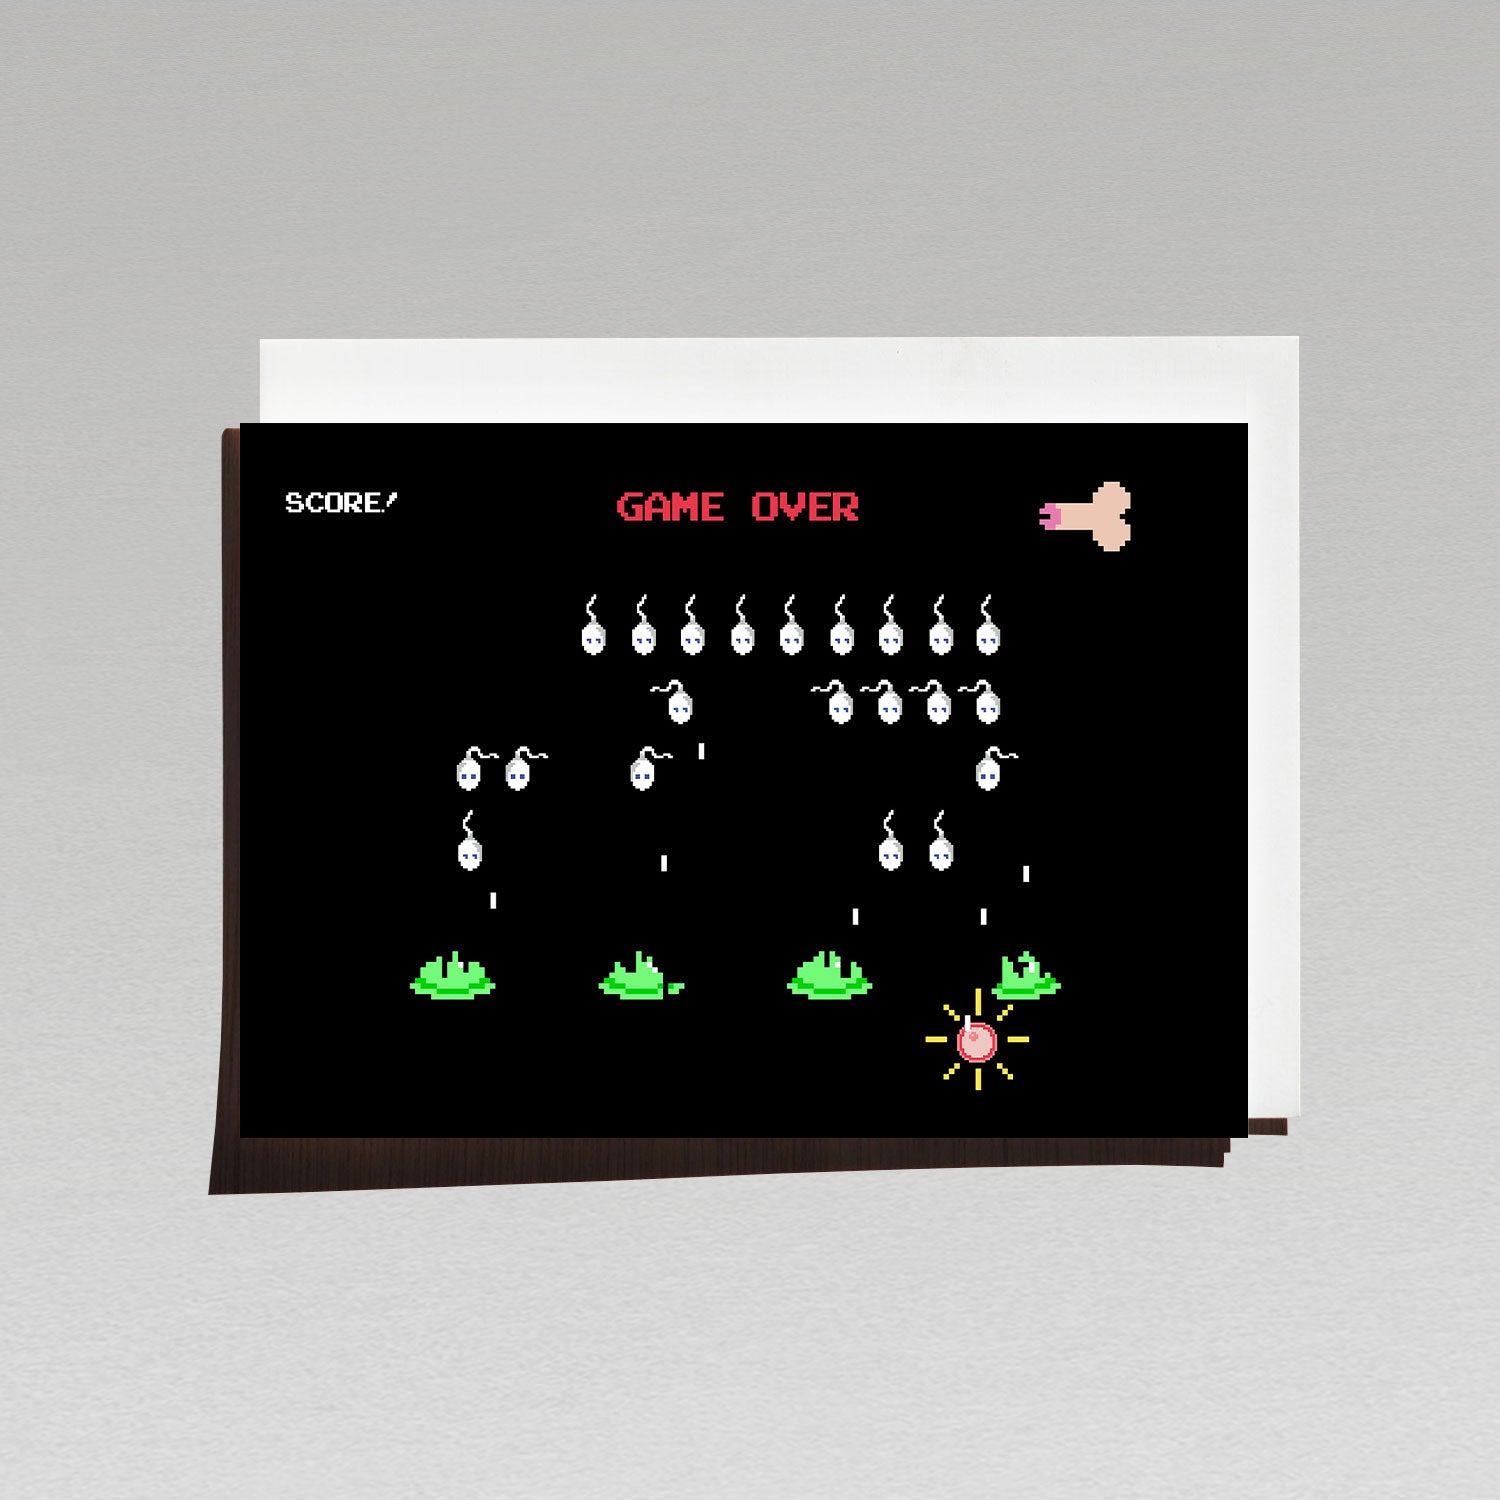 Sperm Invaders Retro 8 bit gaming Space Invaders inspired pregnancy announcement parody greeting card with sperm as aliens trying to hit an egg and text Game Over